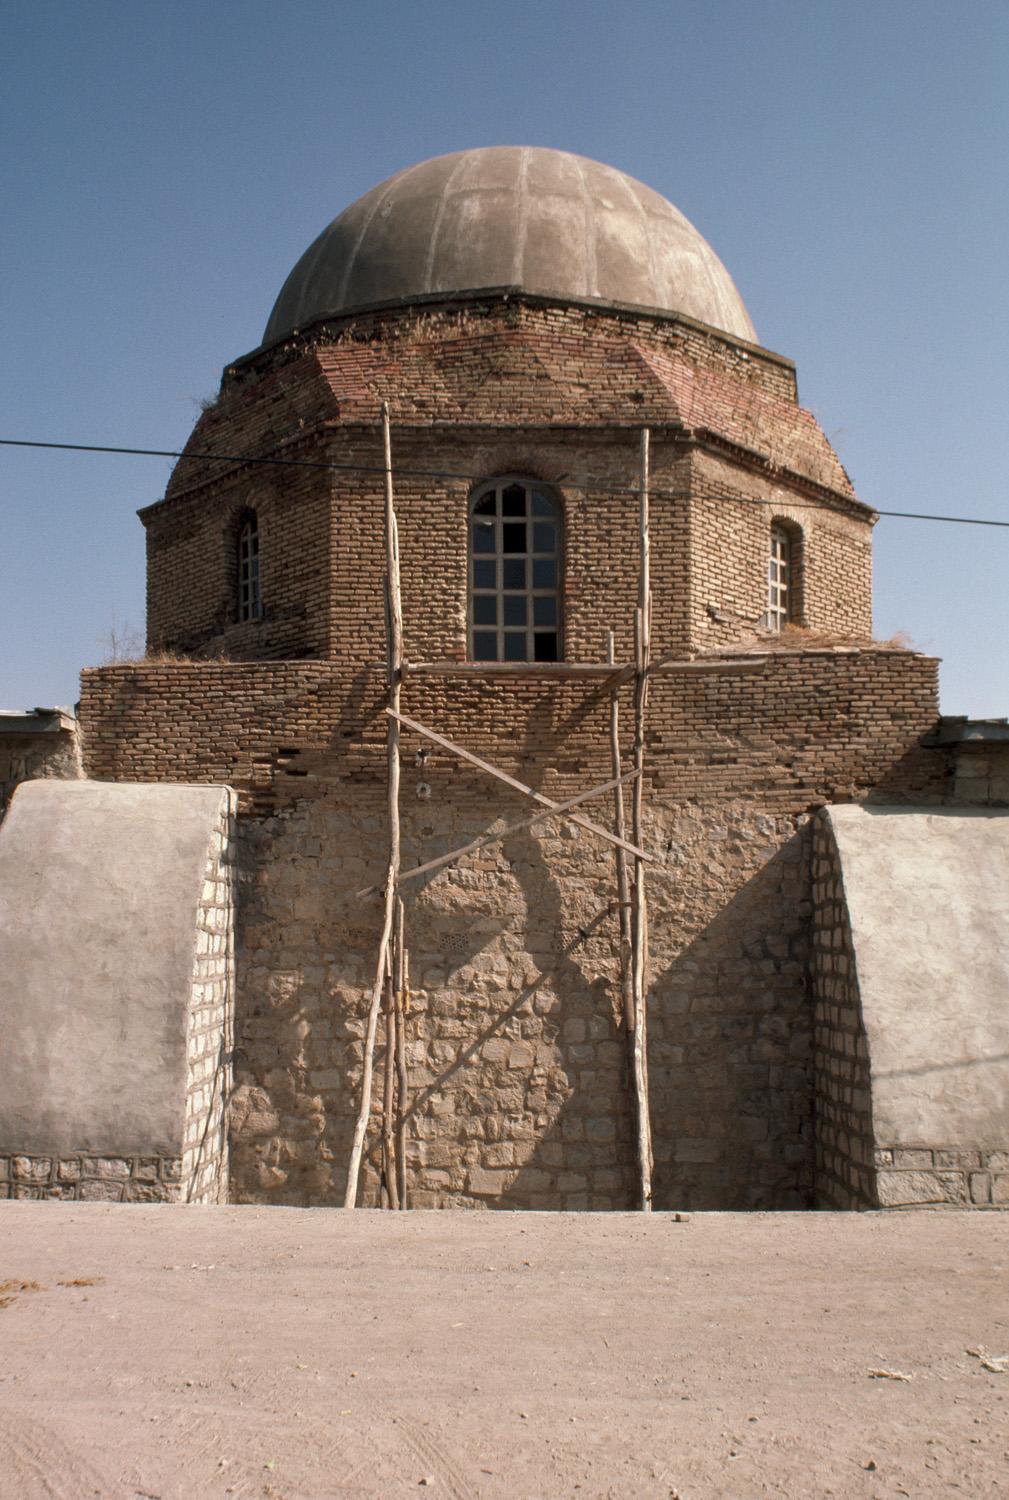 Exterior view from south showing qibla wall and dome of sanctuary